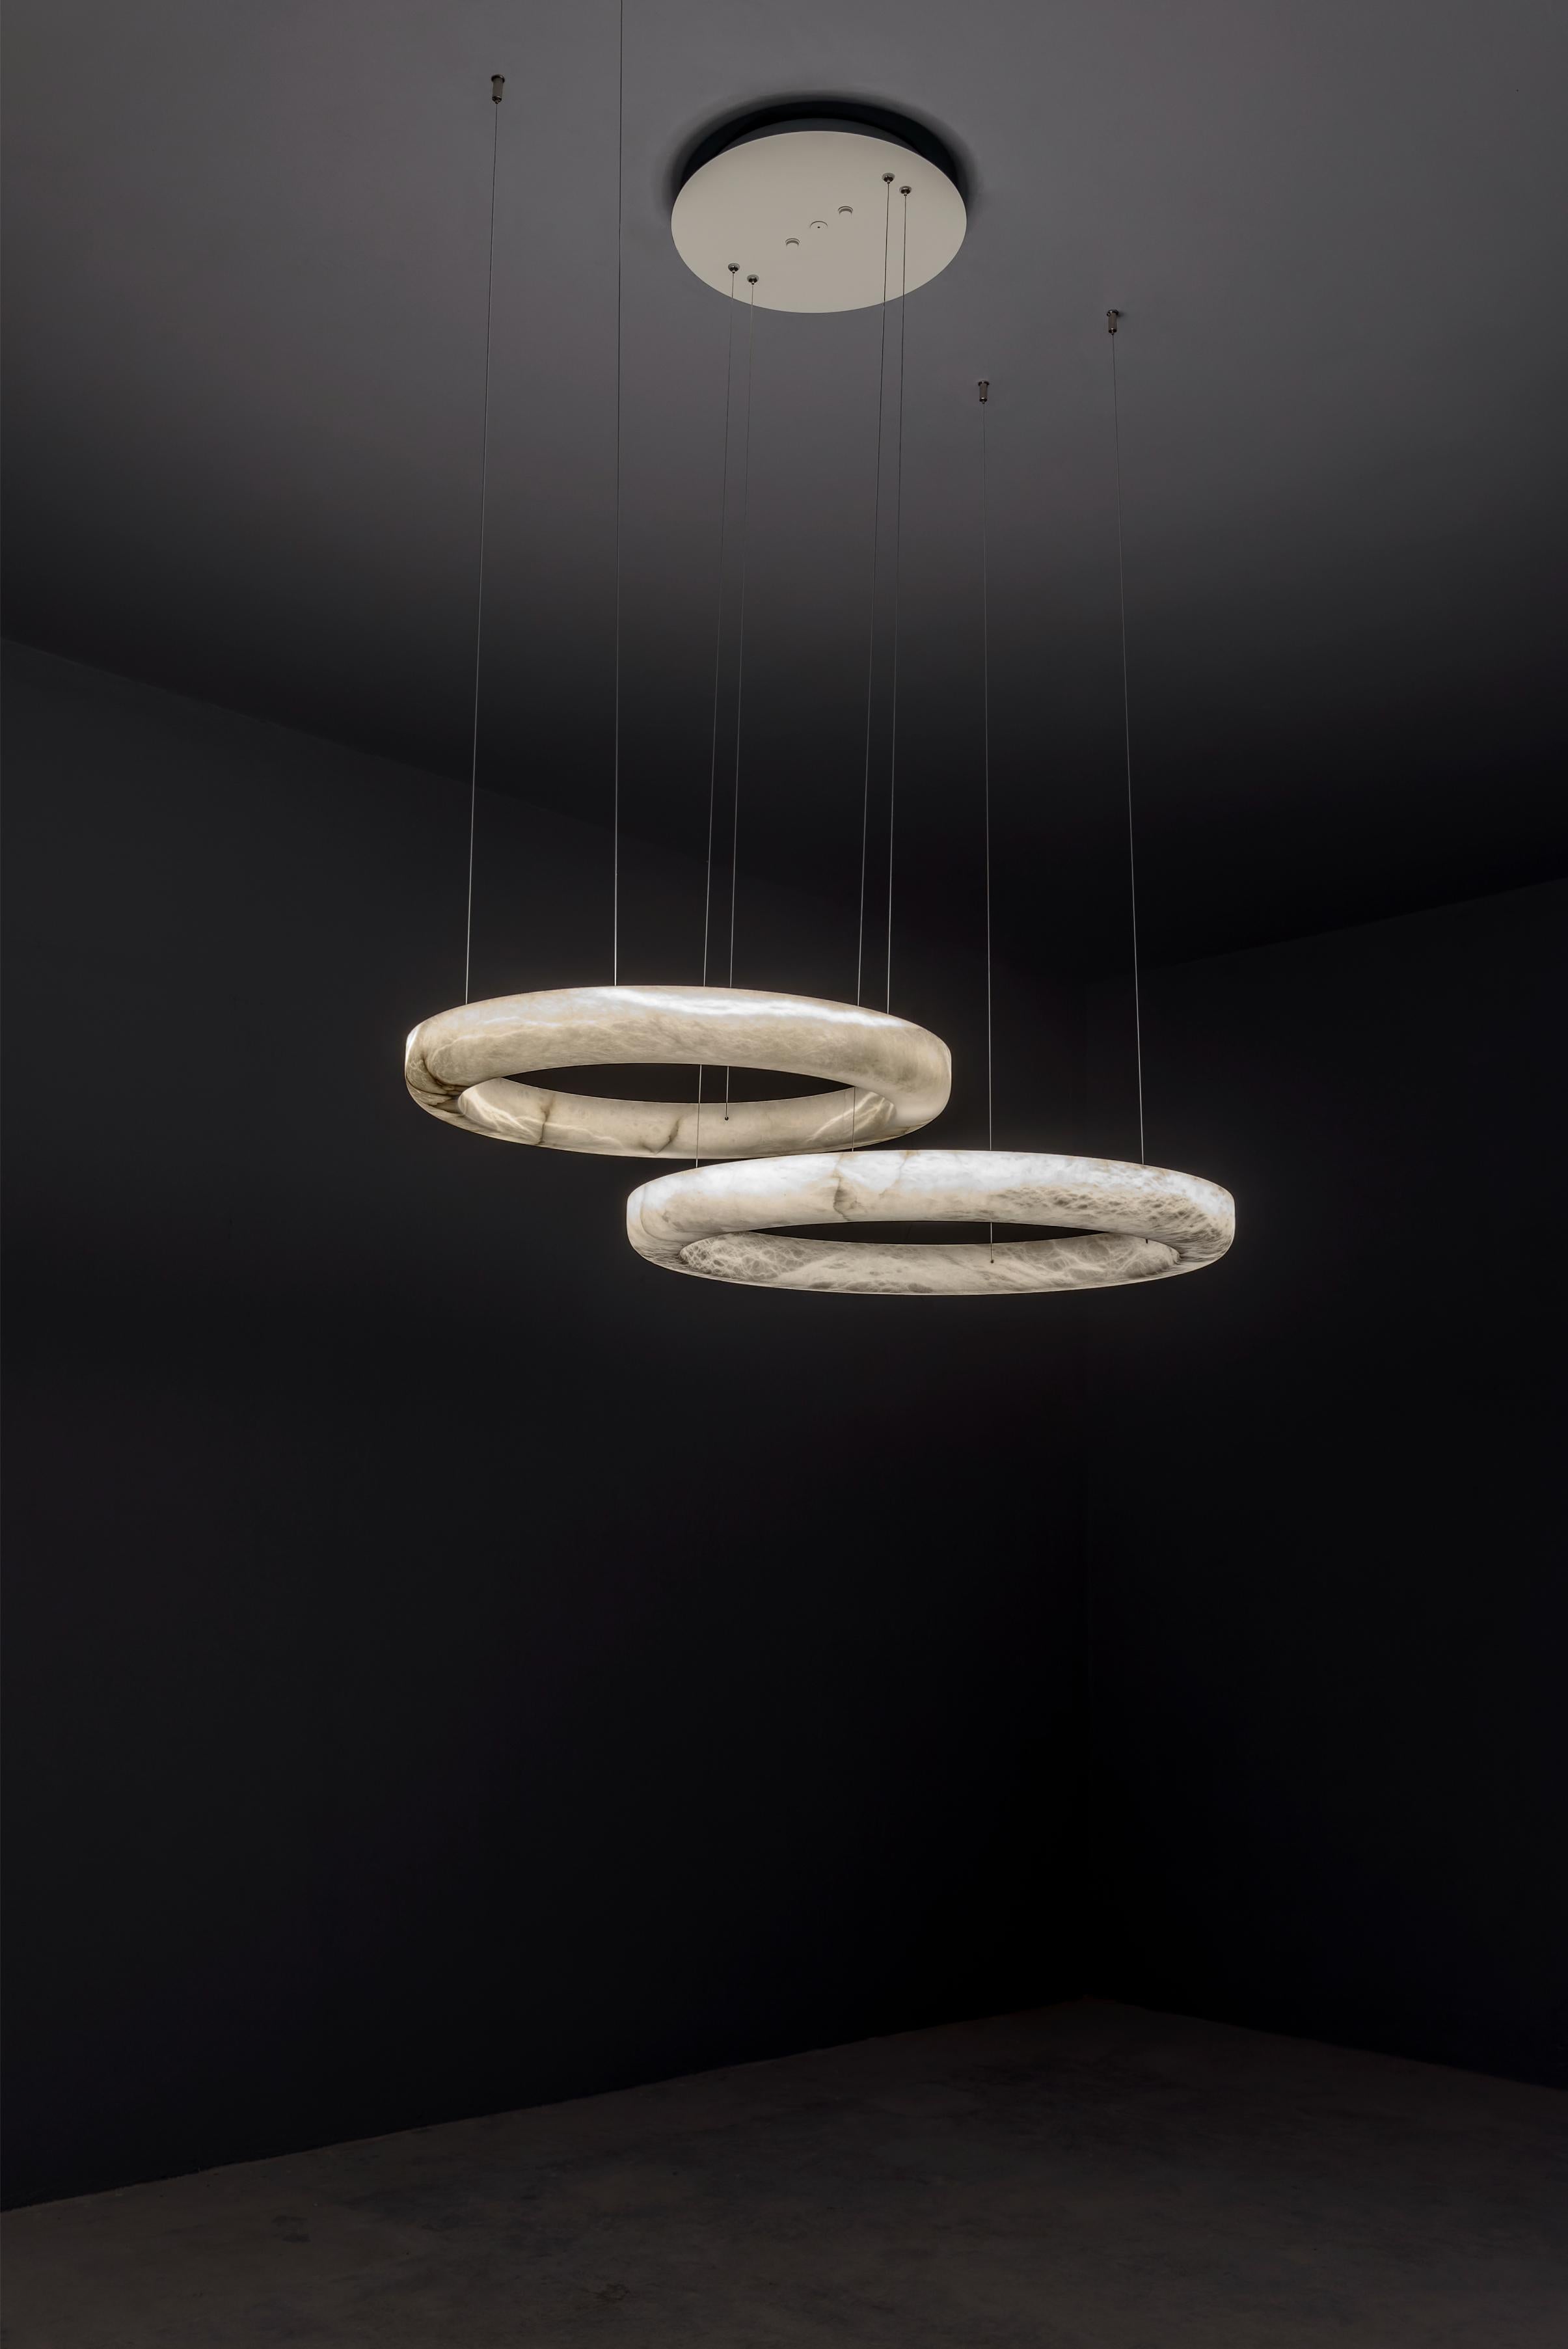 Set of 2 Halos Pendant Lamps by United Alabaster
Dimensions: D 120 x H 150 cm (Adjustable Height)
Materials: Alabaster

Halo with a minimalist structure, fully illuminated to appreciate all the details of each unique piece. Height adjustable